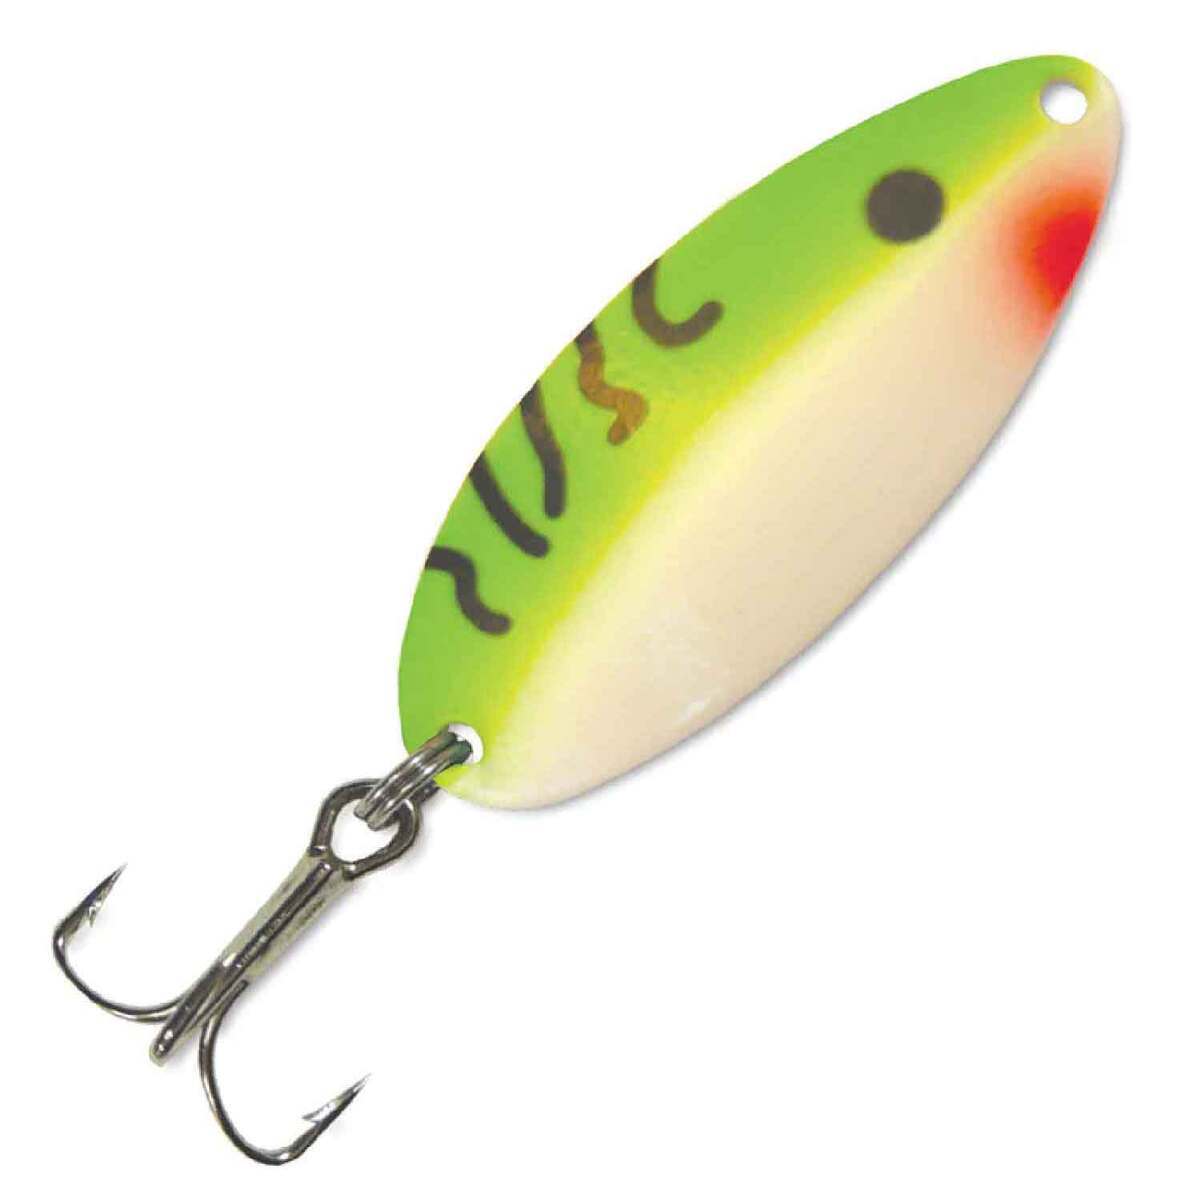 Acme Little Cleo Super Glow Casting Spoon - Green Digger, 2/5oz